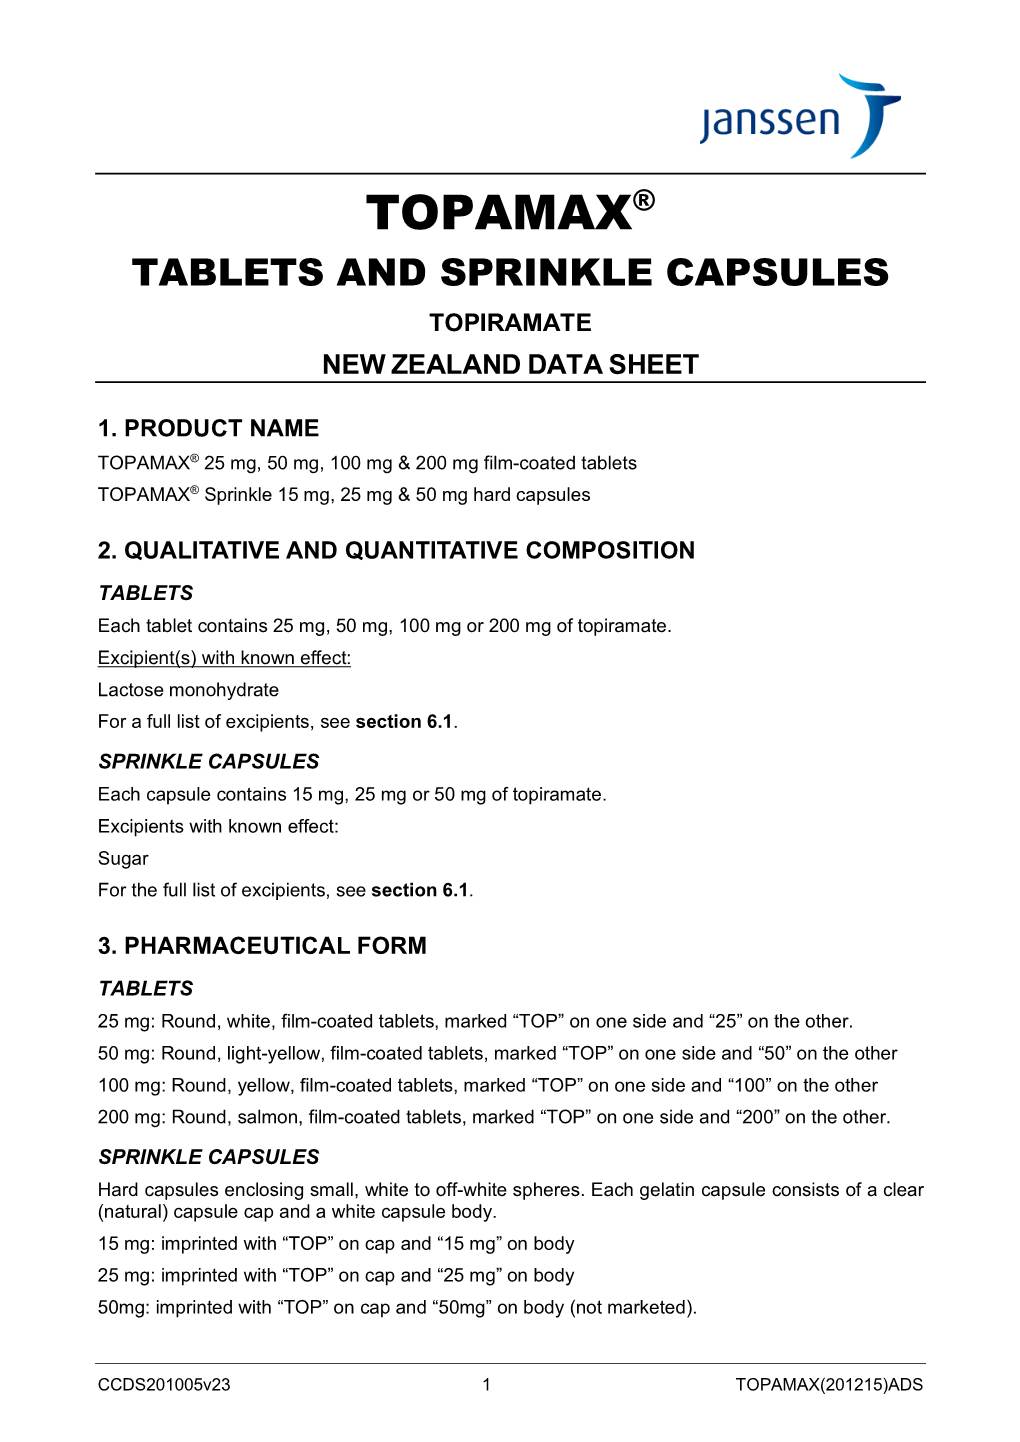 Topamax® Tablets and Sprinkle Capsules Topiramate New Zealand Data Sheet